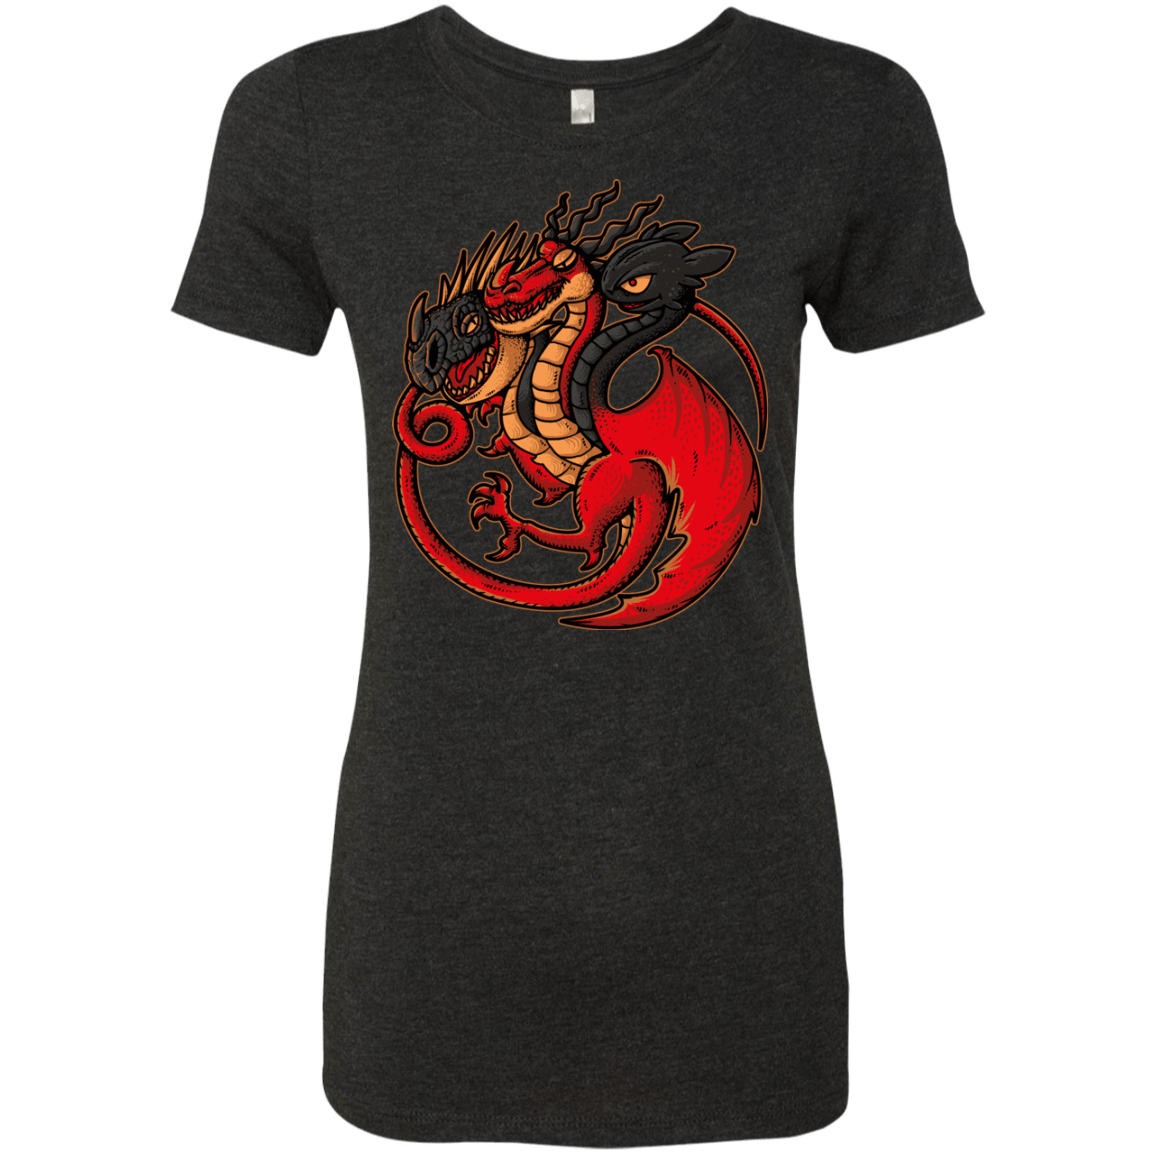 T-Shirts Vintage Black / Small FIRE BLOOD AND TRAINING Women's Triblend T-Shirt